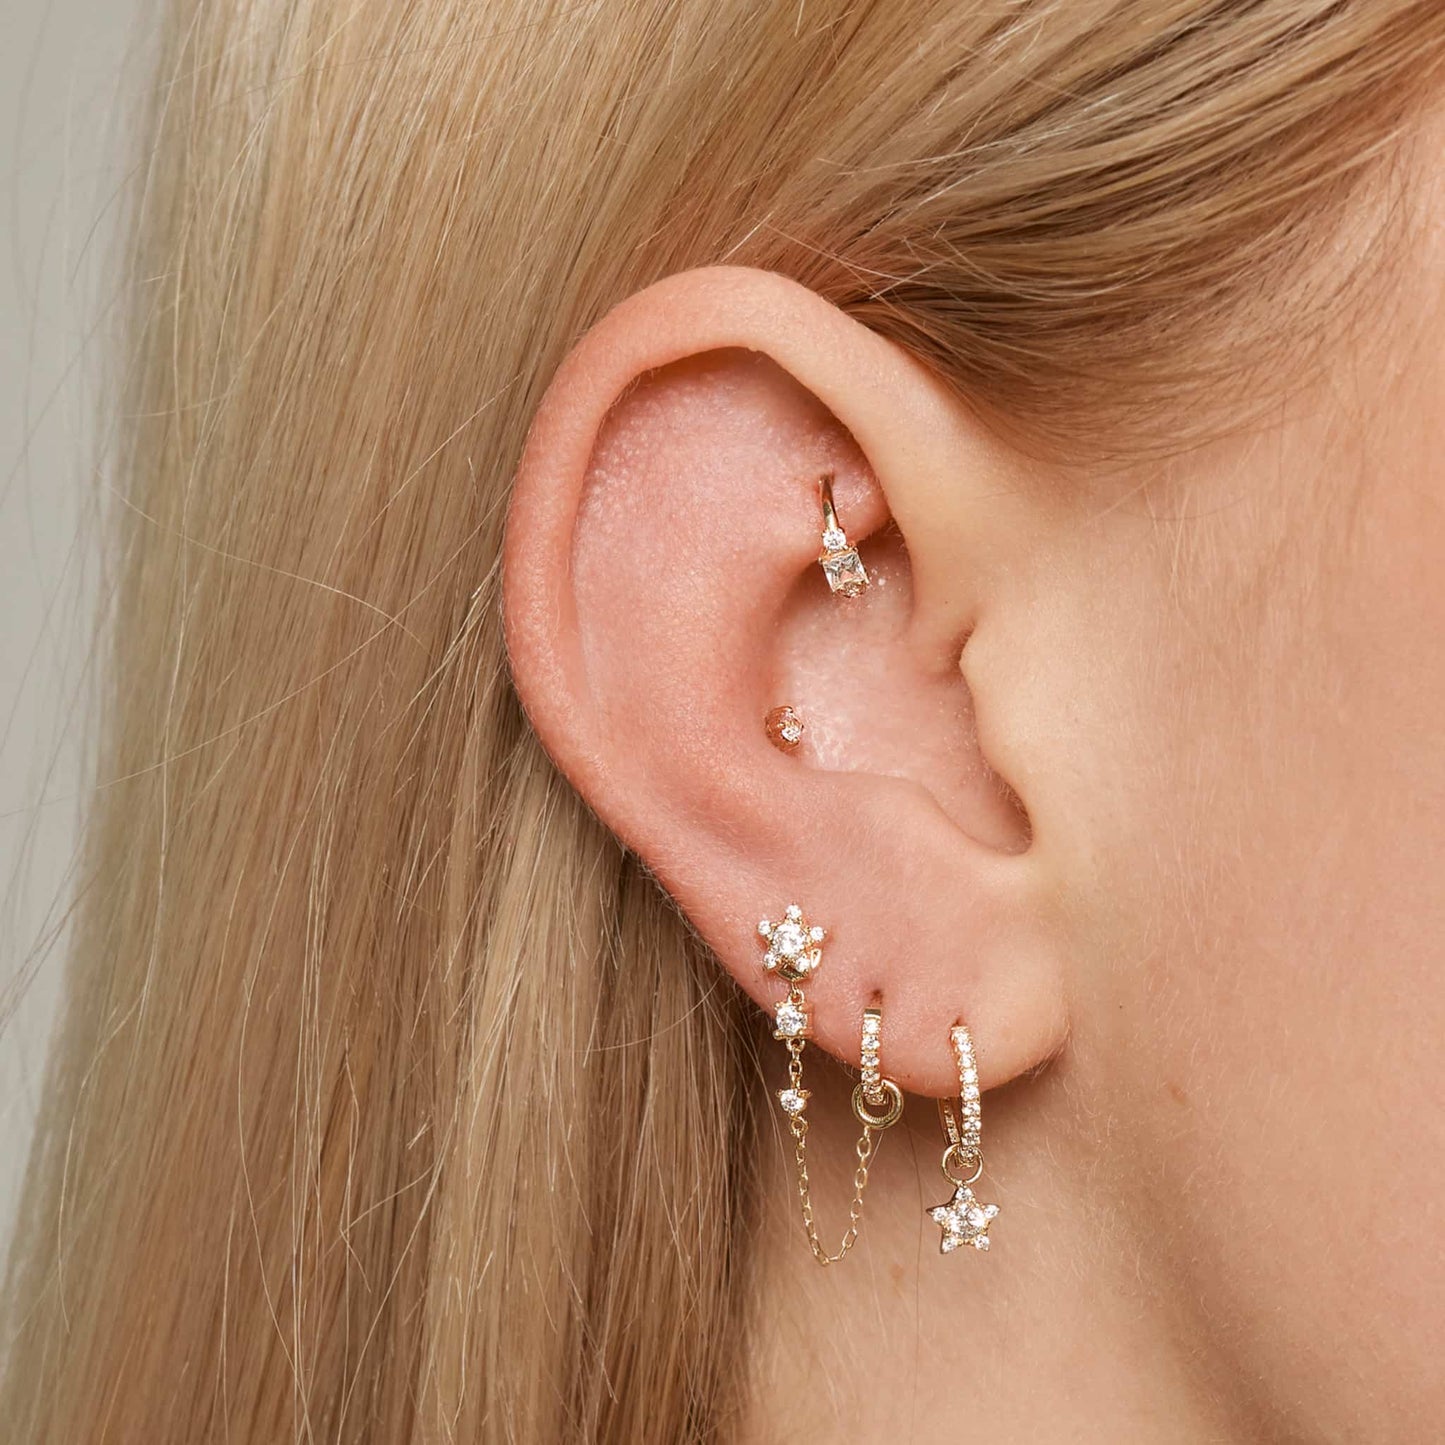 Ear with the Charms for Huggie Earrings